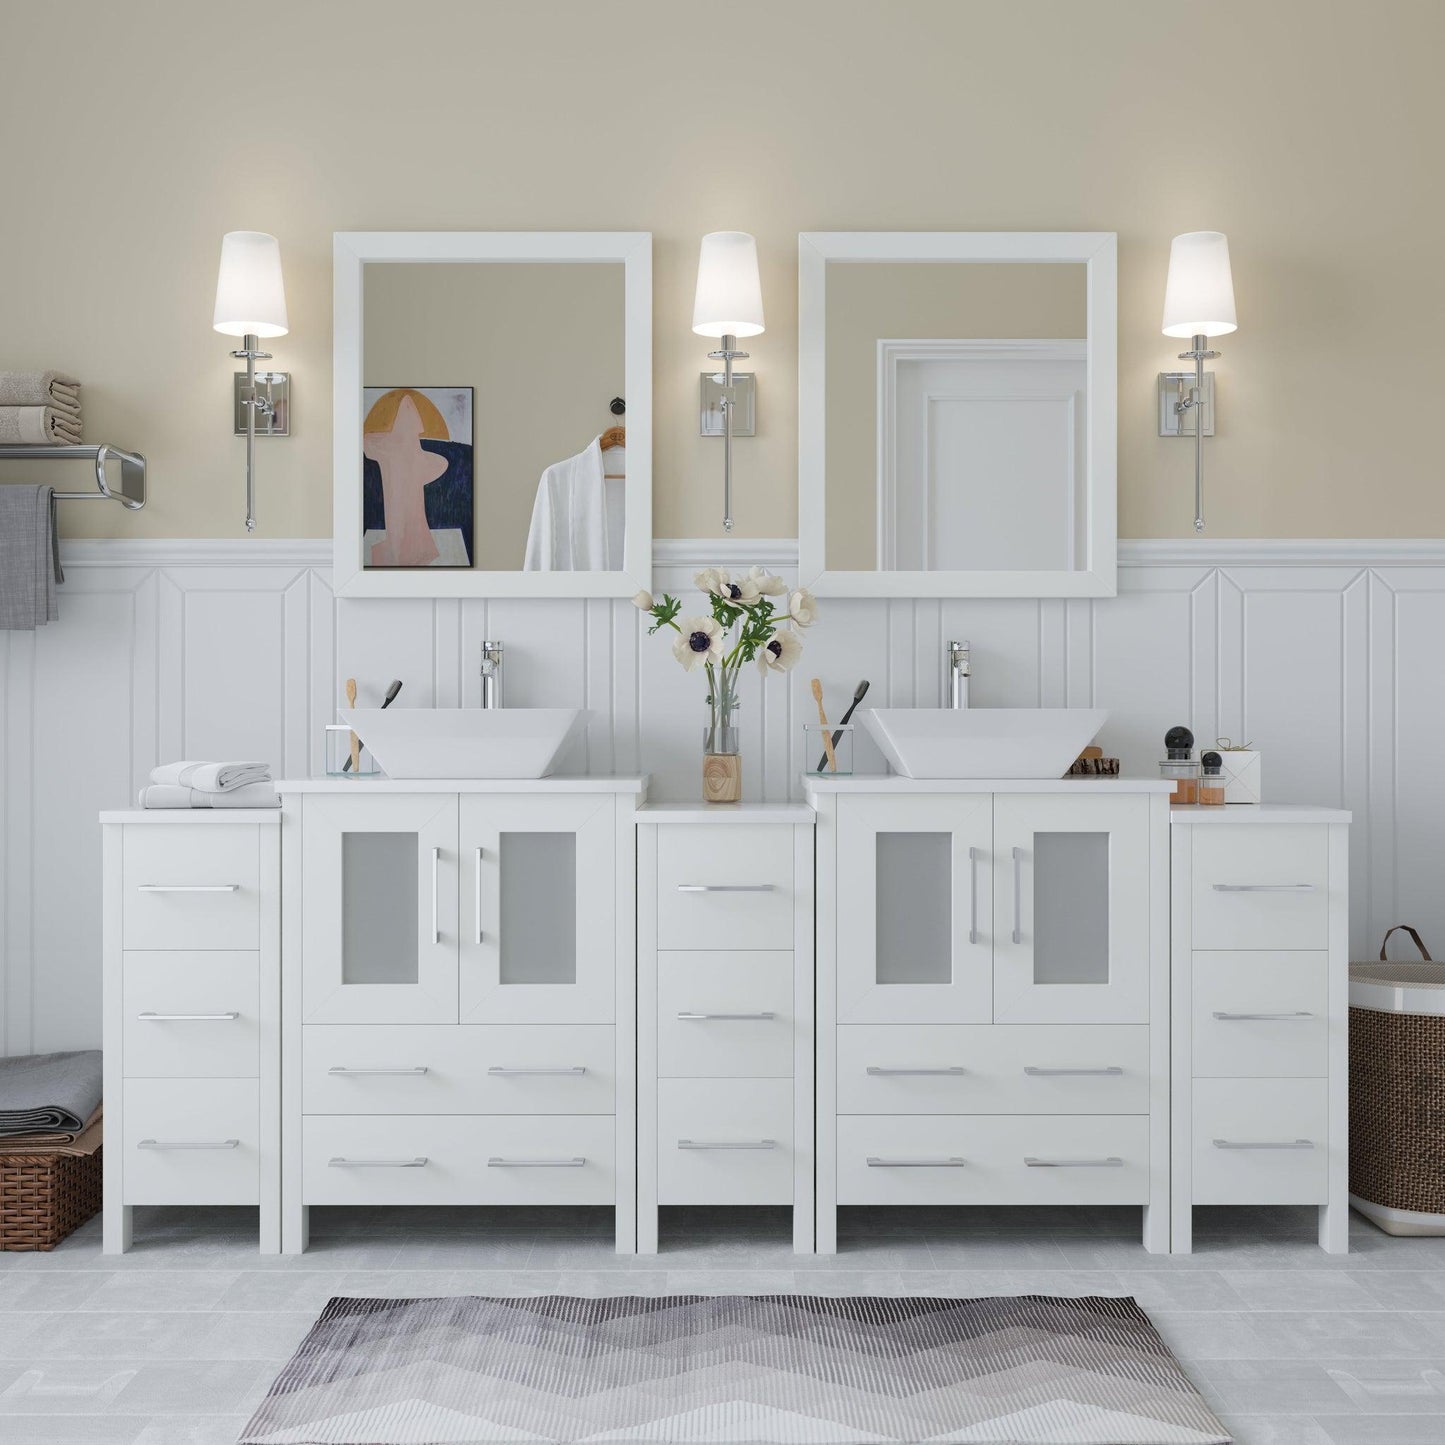 Vanity Art Ravenna 84" Double White Freestanding Vanity Set With White Engineered Marble Top, 2 Ceramic Vessel Sinks, 3 Side Cabinets and 2 Mirrors